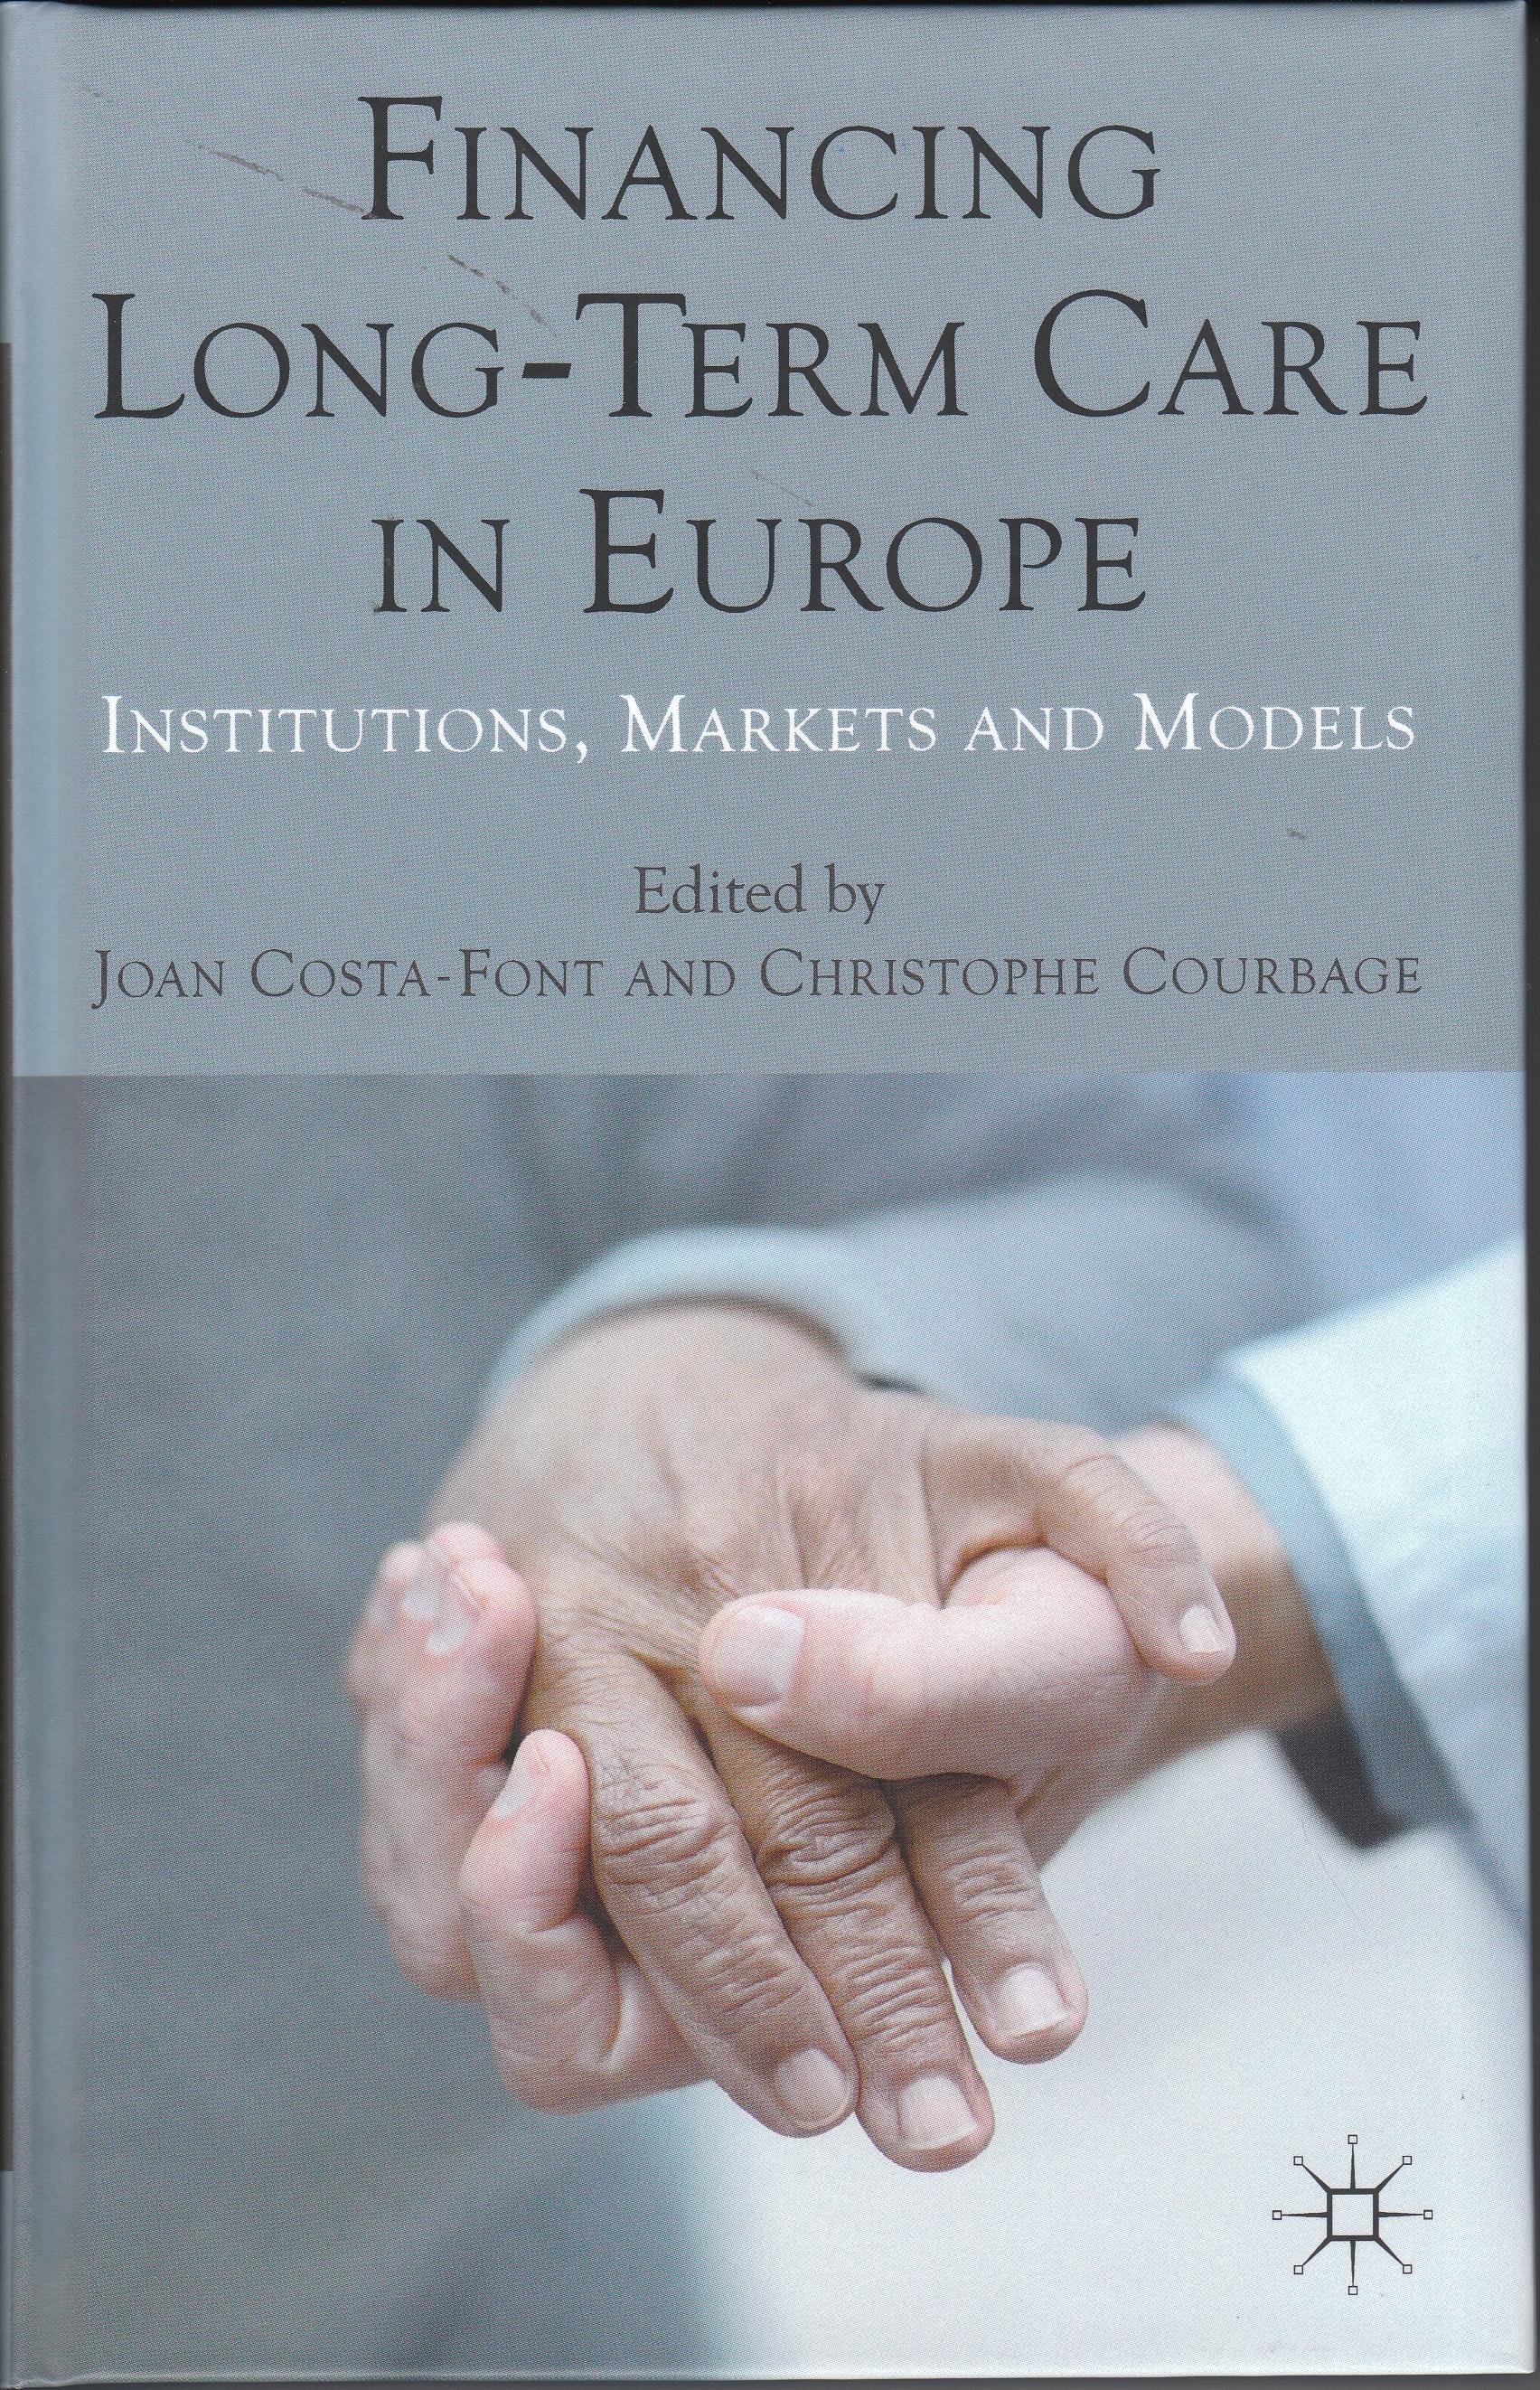 Financing Long-Term Care in Europe "Institutions, Markets and Models"